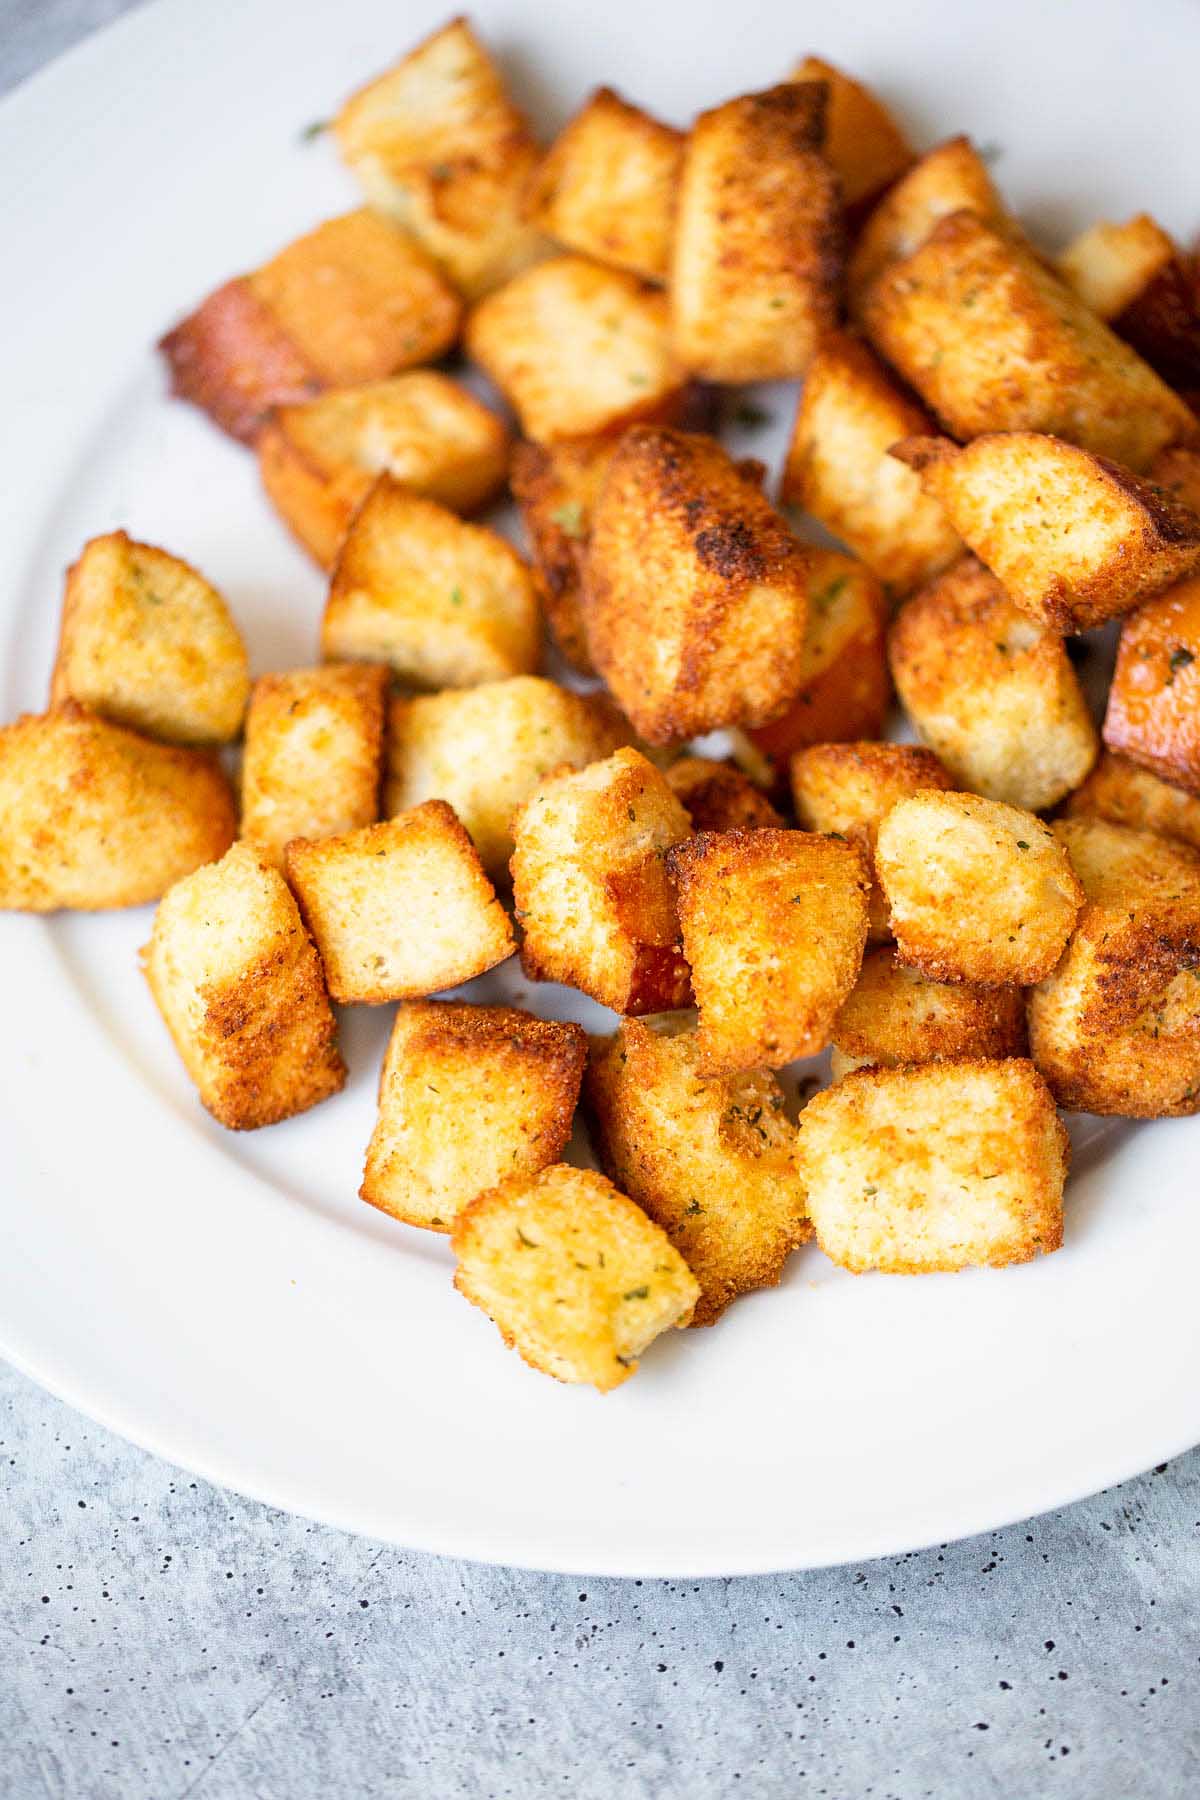 Garlic croutons on a plate.